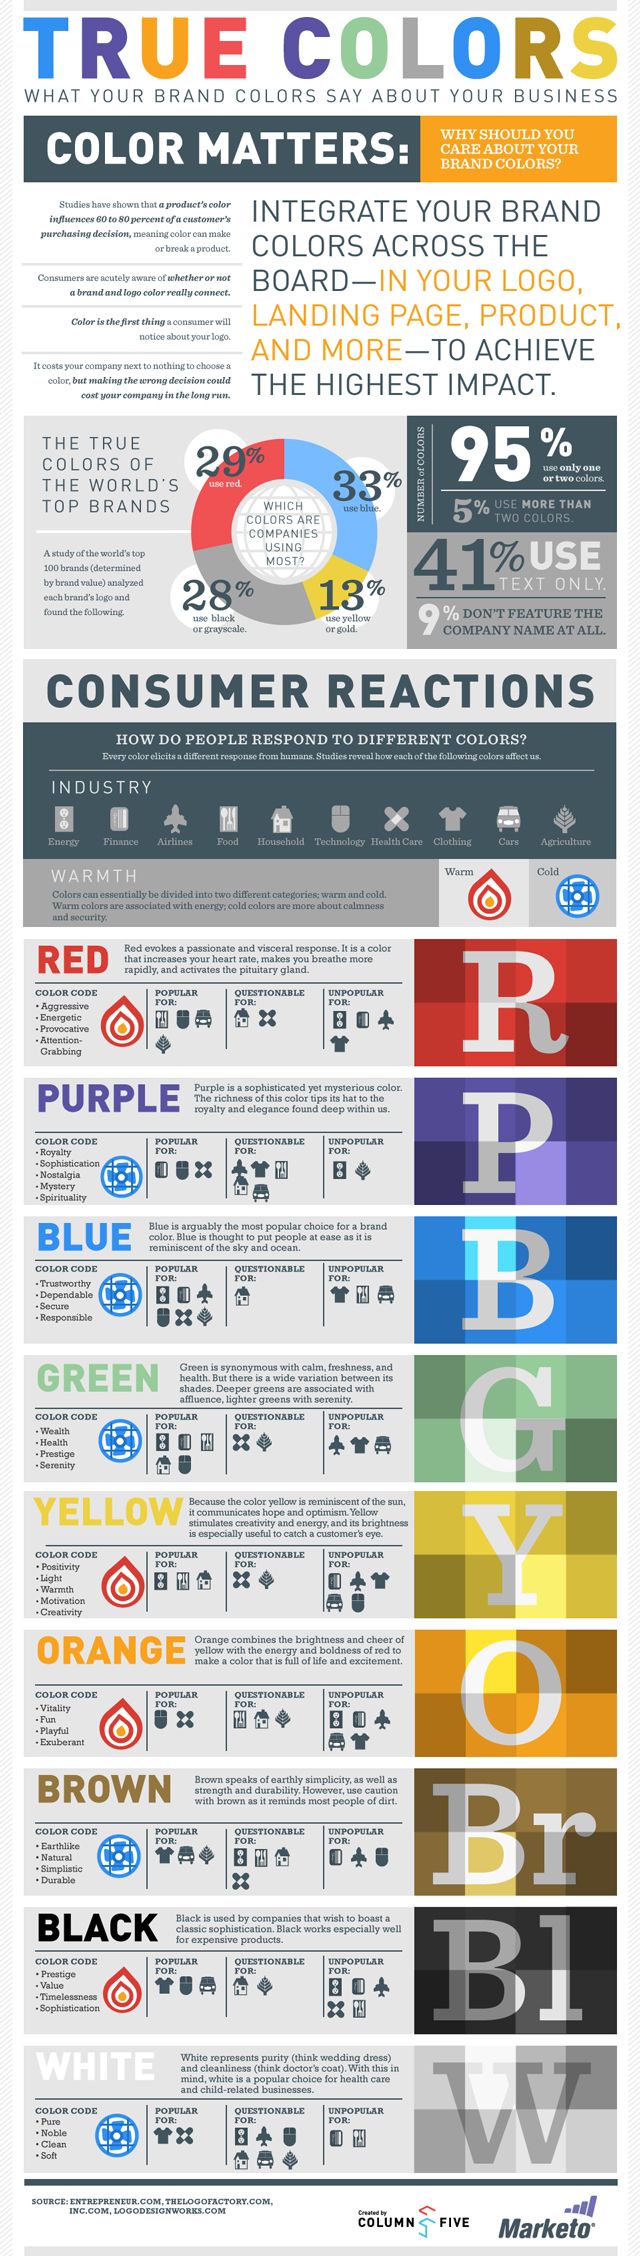 Consumer reactions to Color